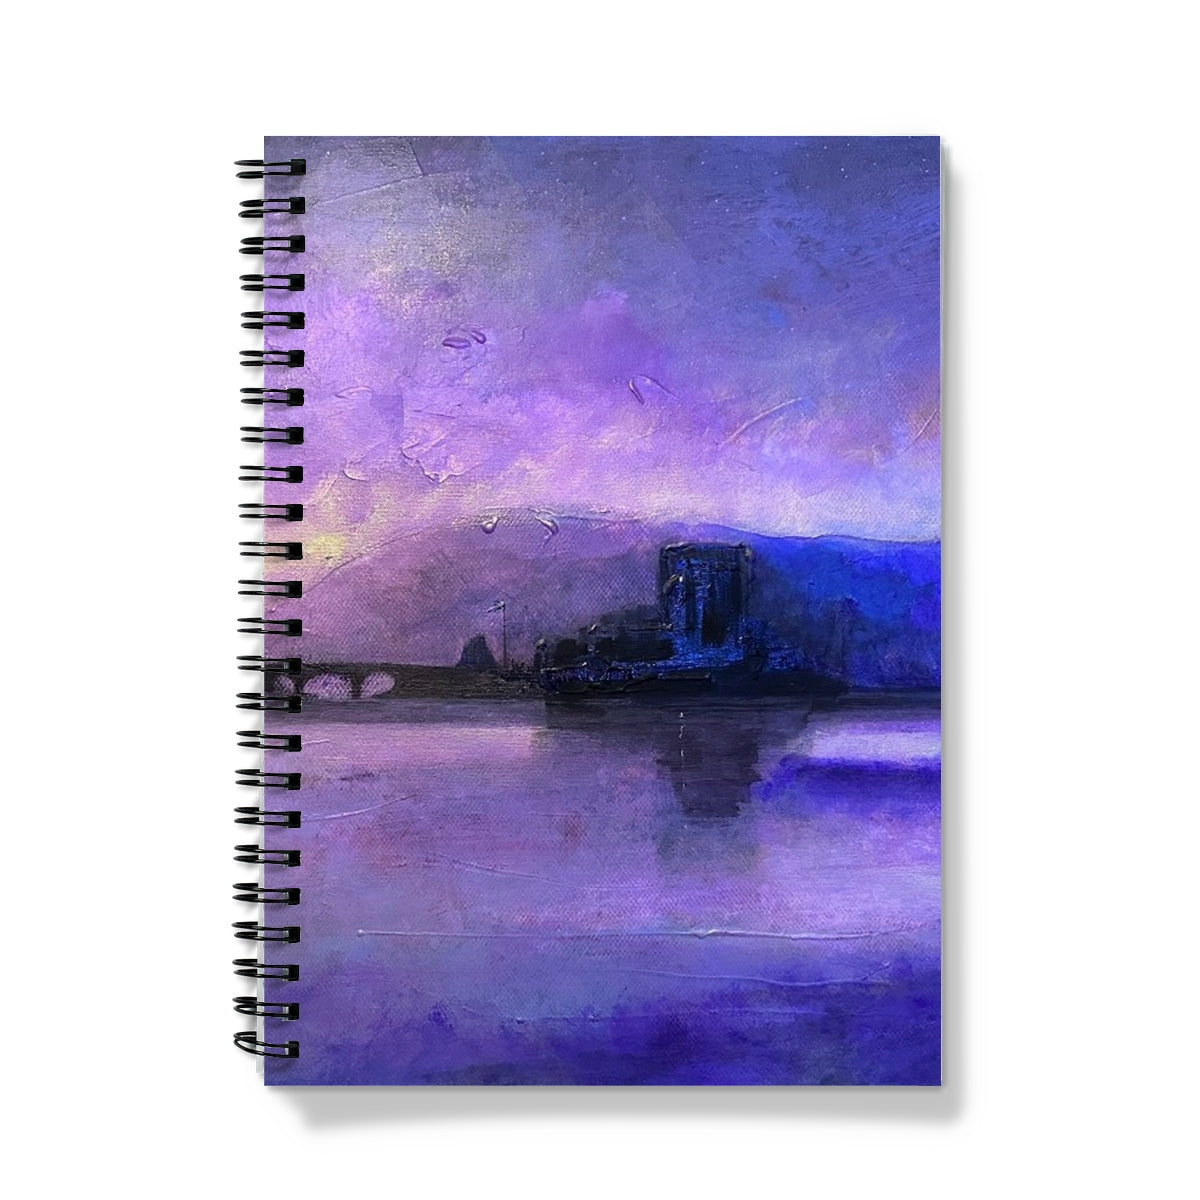 Eilean Donan Castle Moonset Art Gifts Notebook-Journals & Notebooks-Historic & Iconic Scotland Art Gallery-A5-Graph-Paintings, Prints, Homeware, Art Gifts From Scotland By Scottish Artist Kevin Hunter